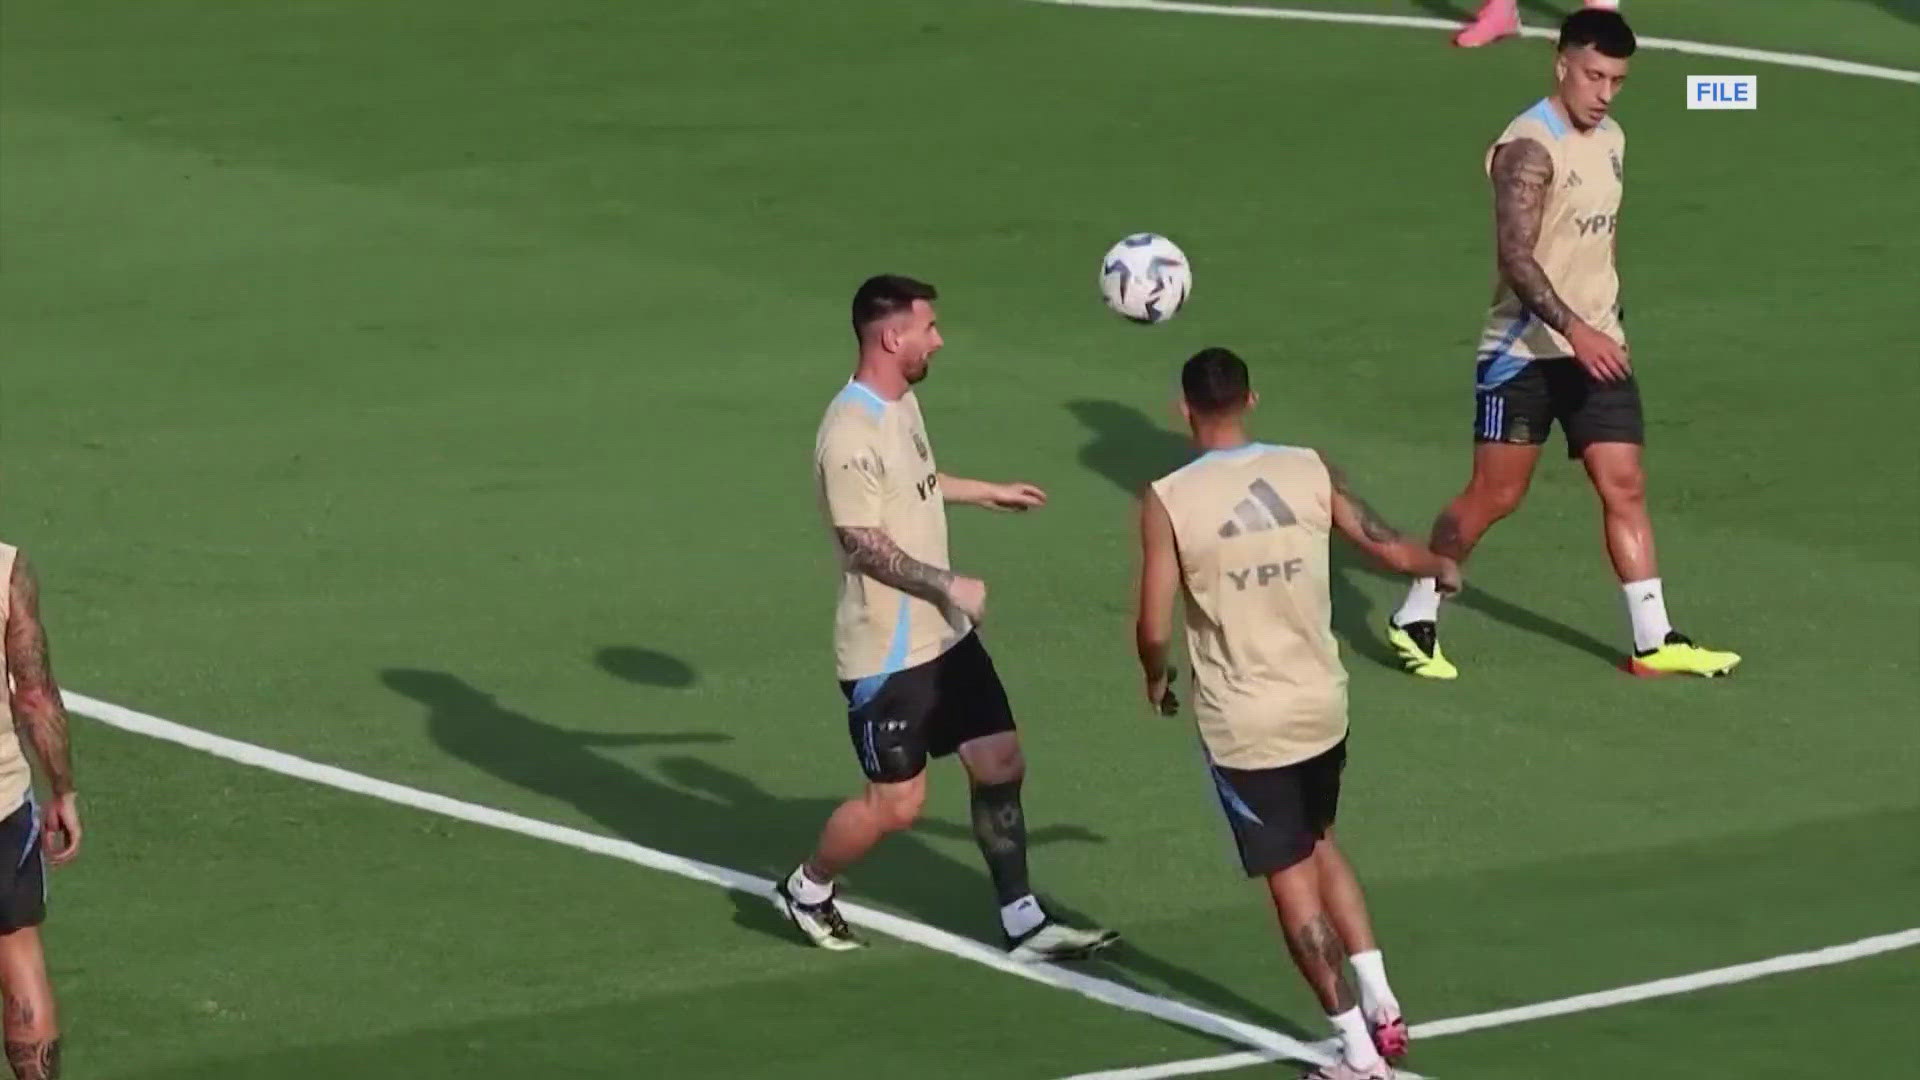 Messi has returned to training after missing Argentina's last match due to an issue with his thigh.